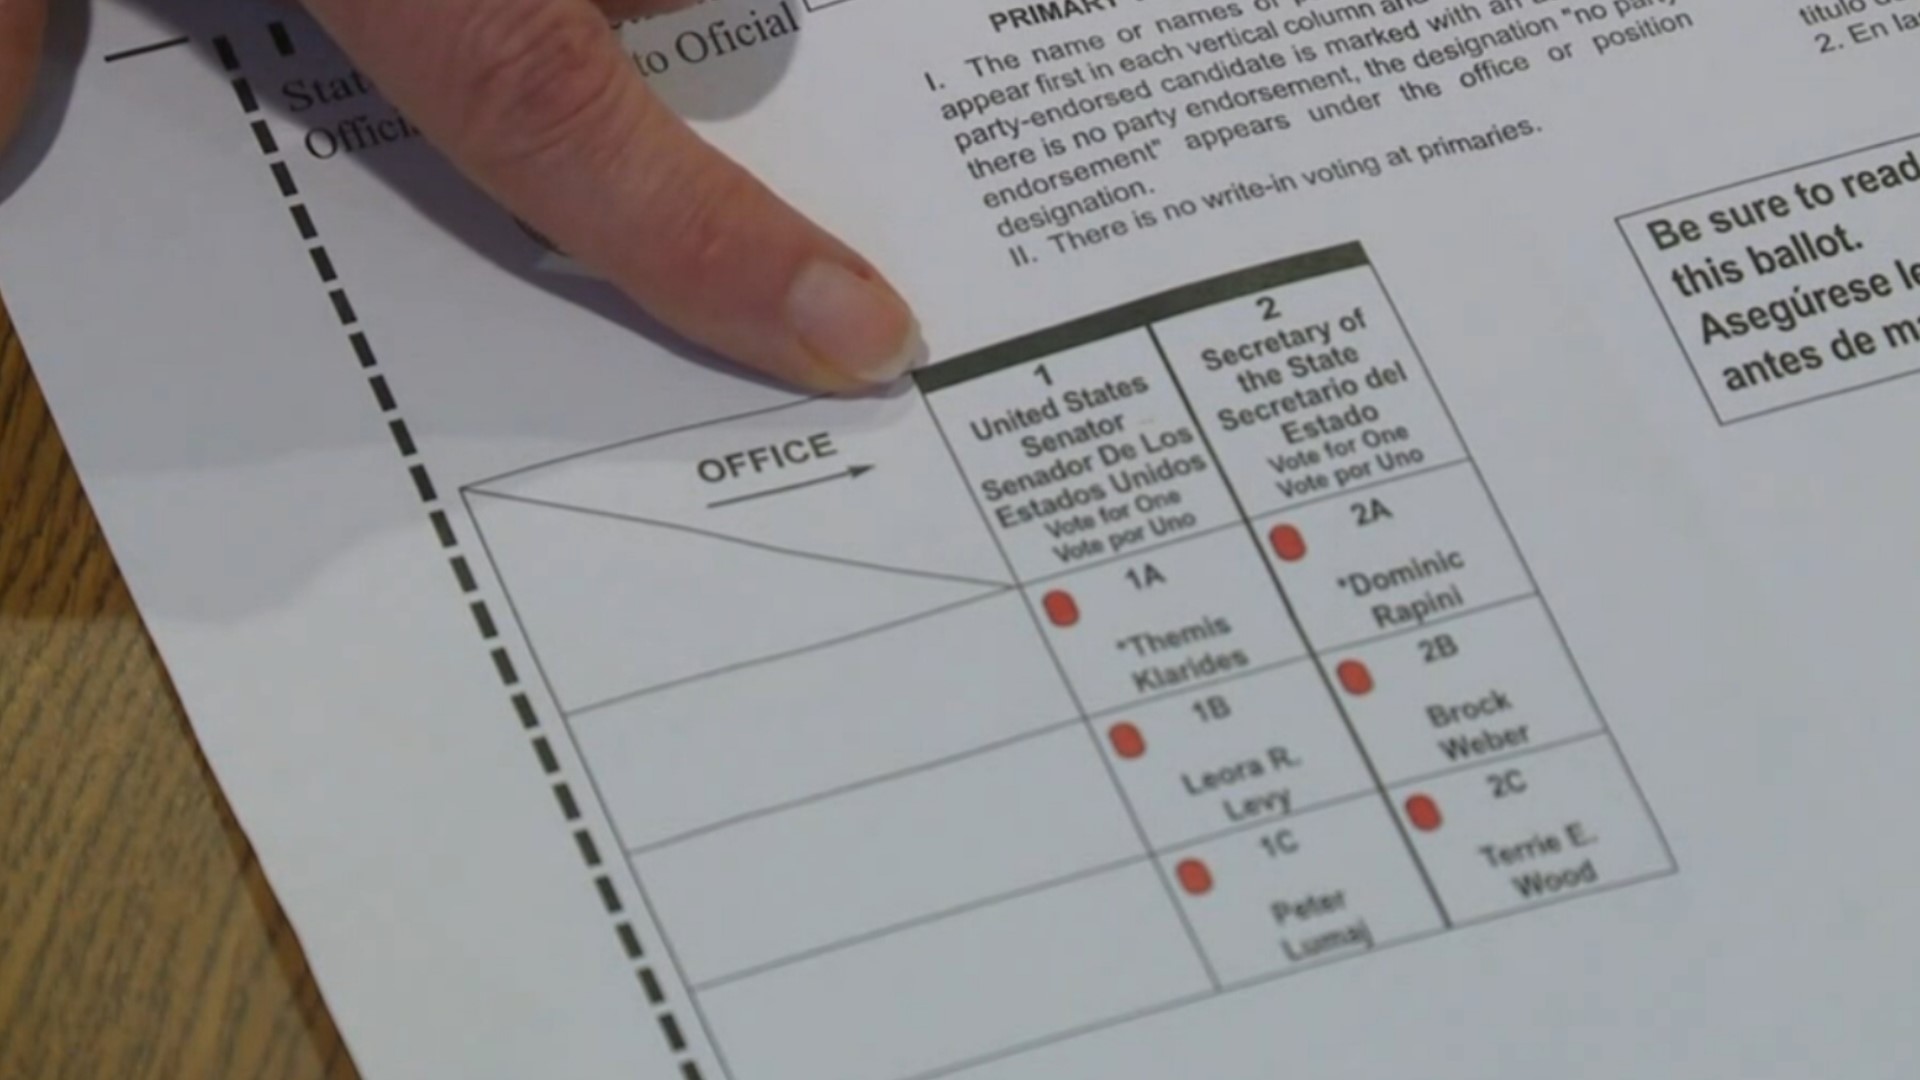 Primary day is now just one week away. FOX61’s Julia LeBlanc is in Hamden with the boxes voters need to check before heading to the polls next week.